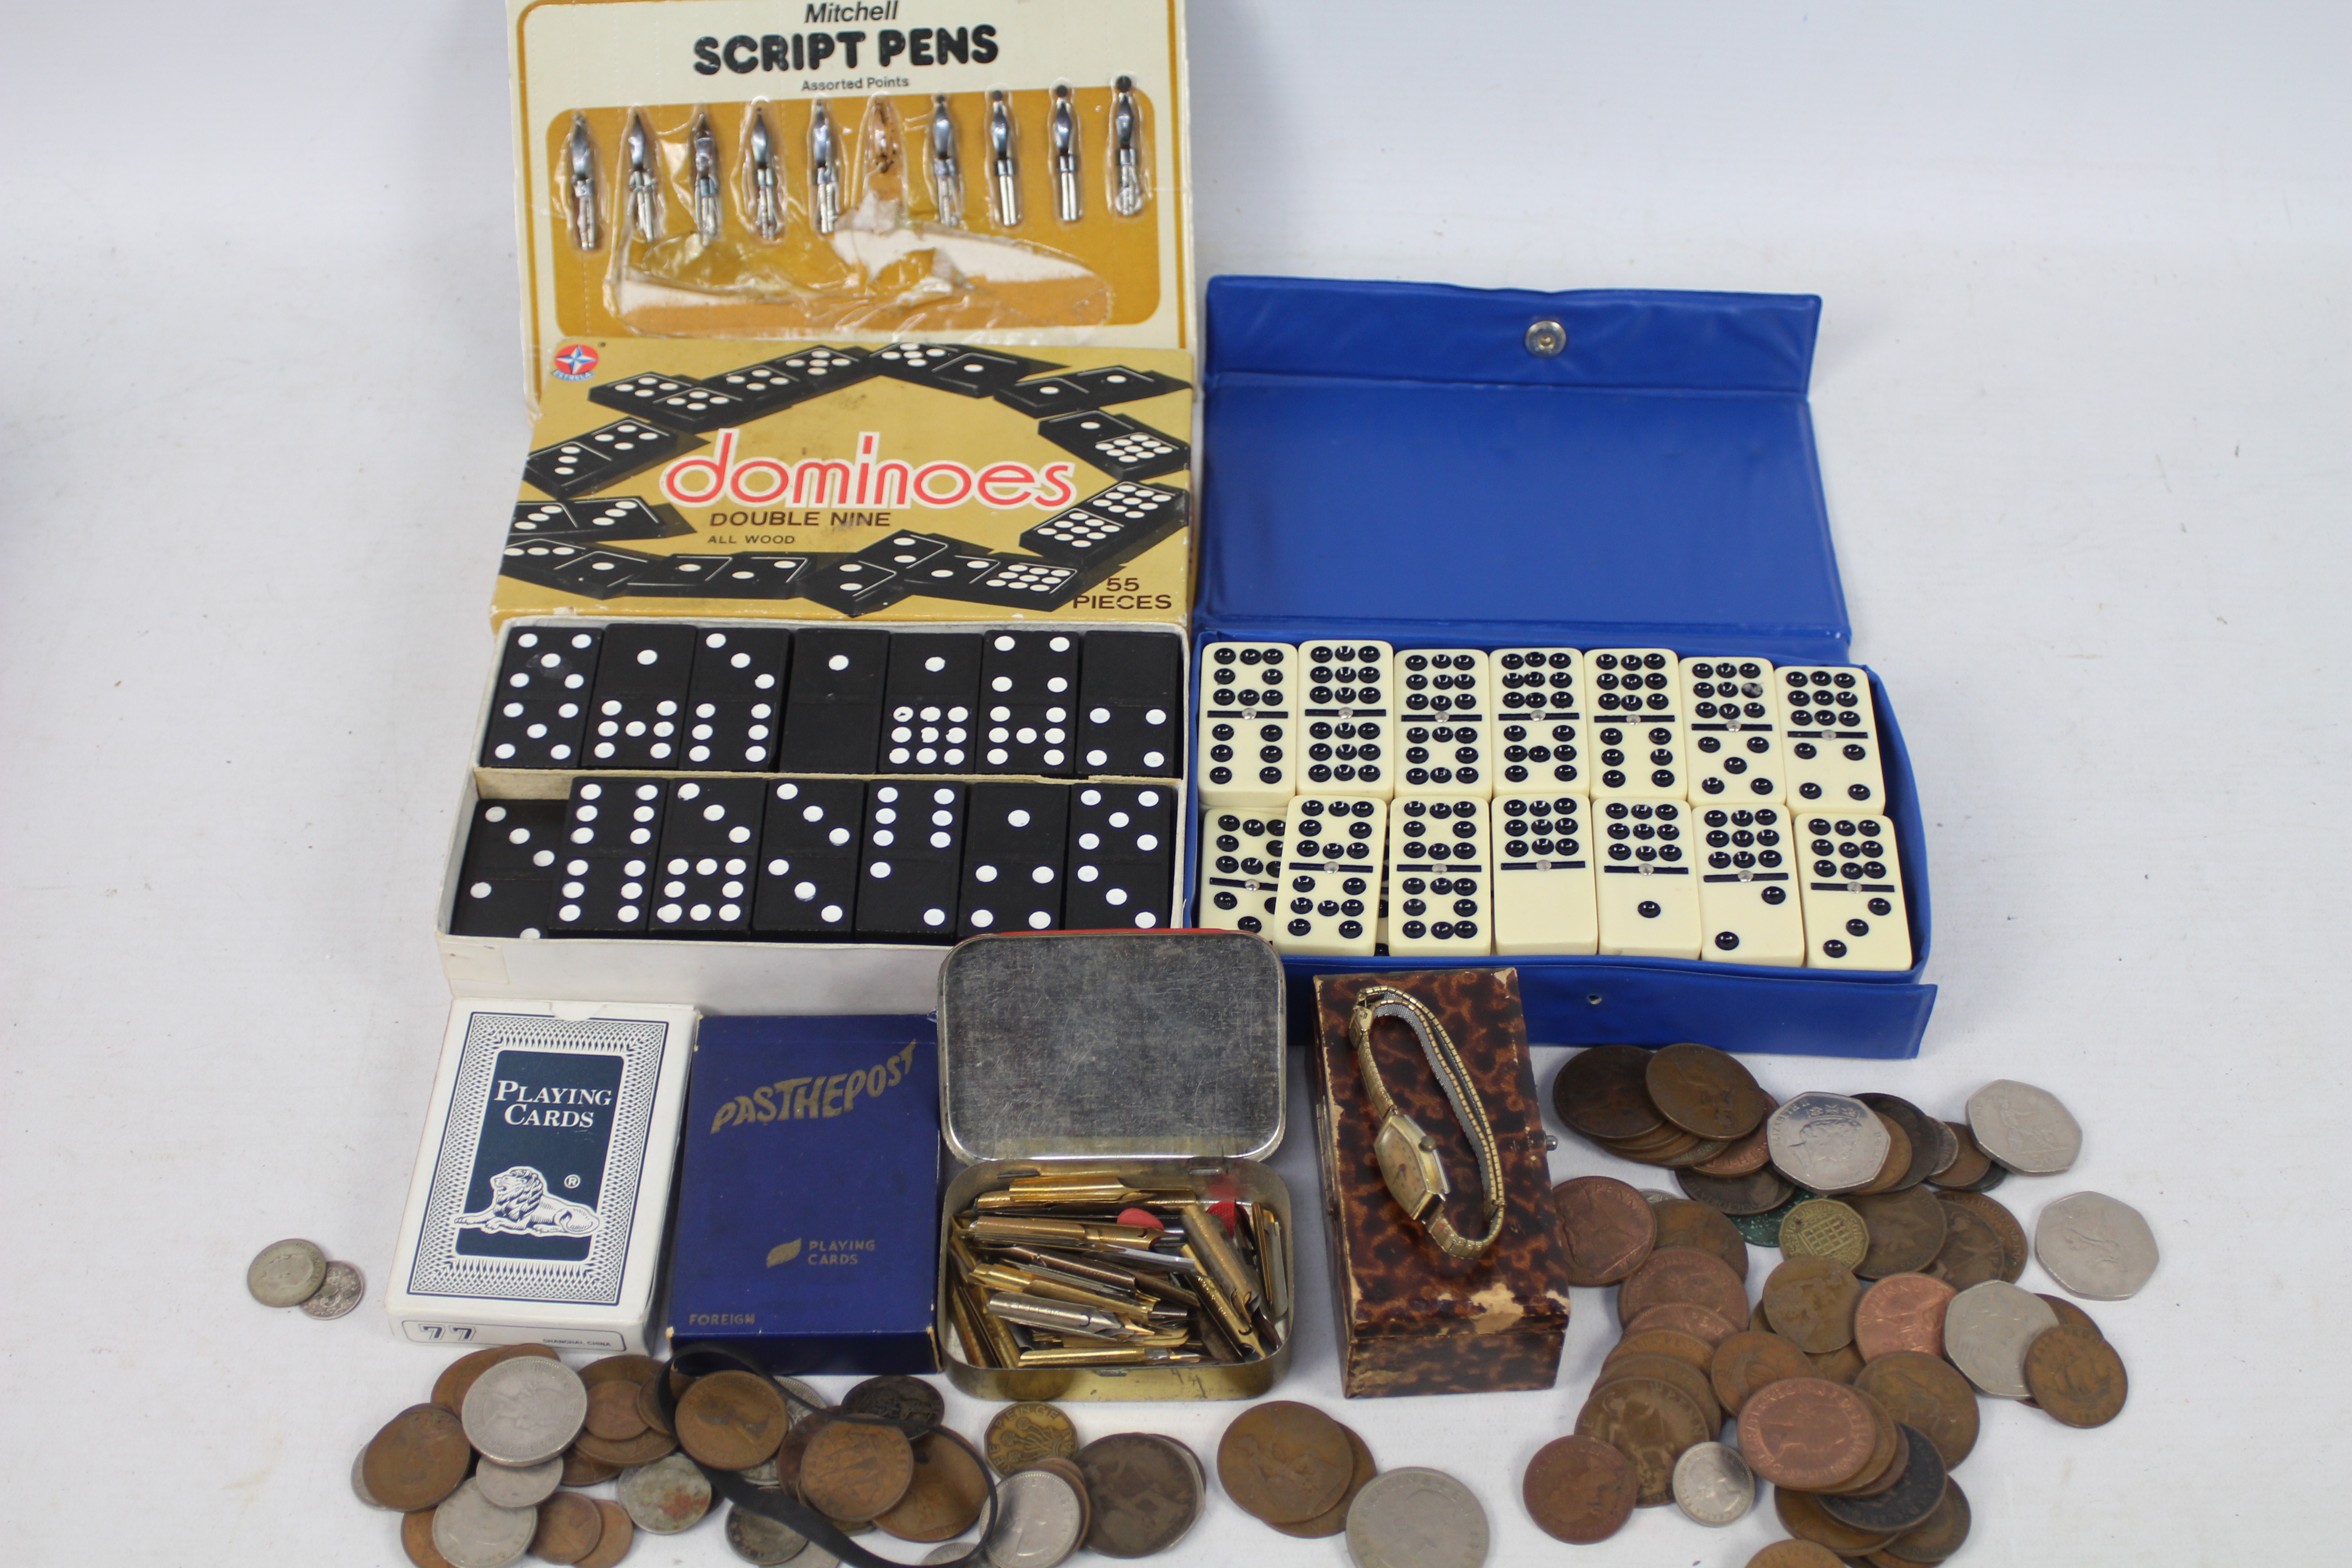 Lot to include a vintage wrist watch, two sets of double nine dominoes, playing cards, pen nibs,